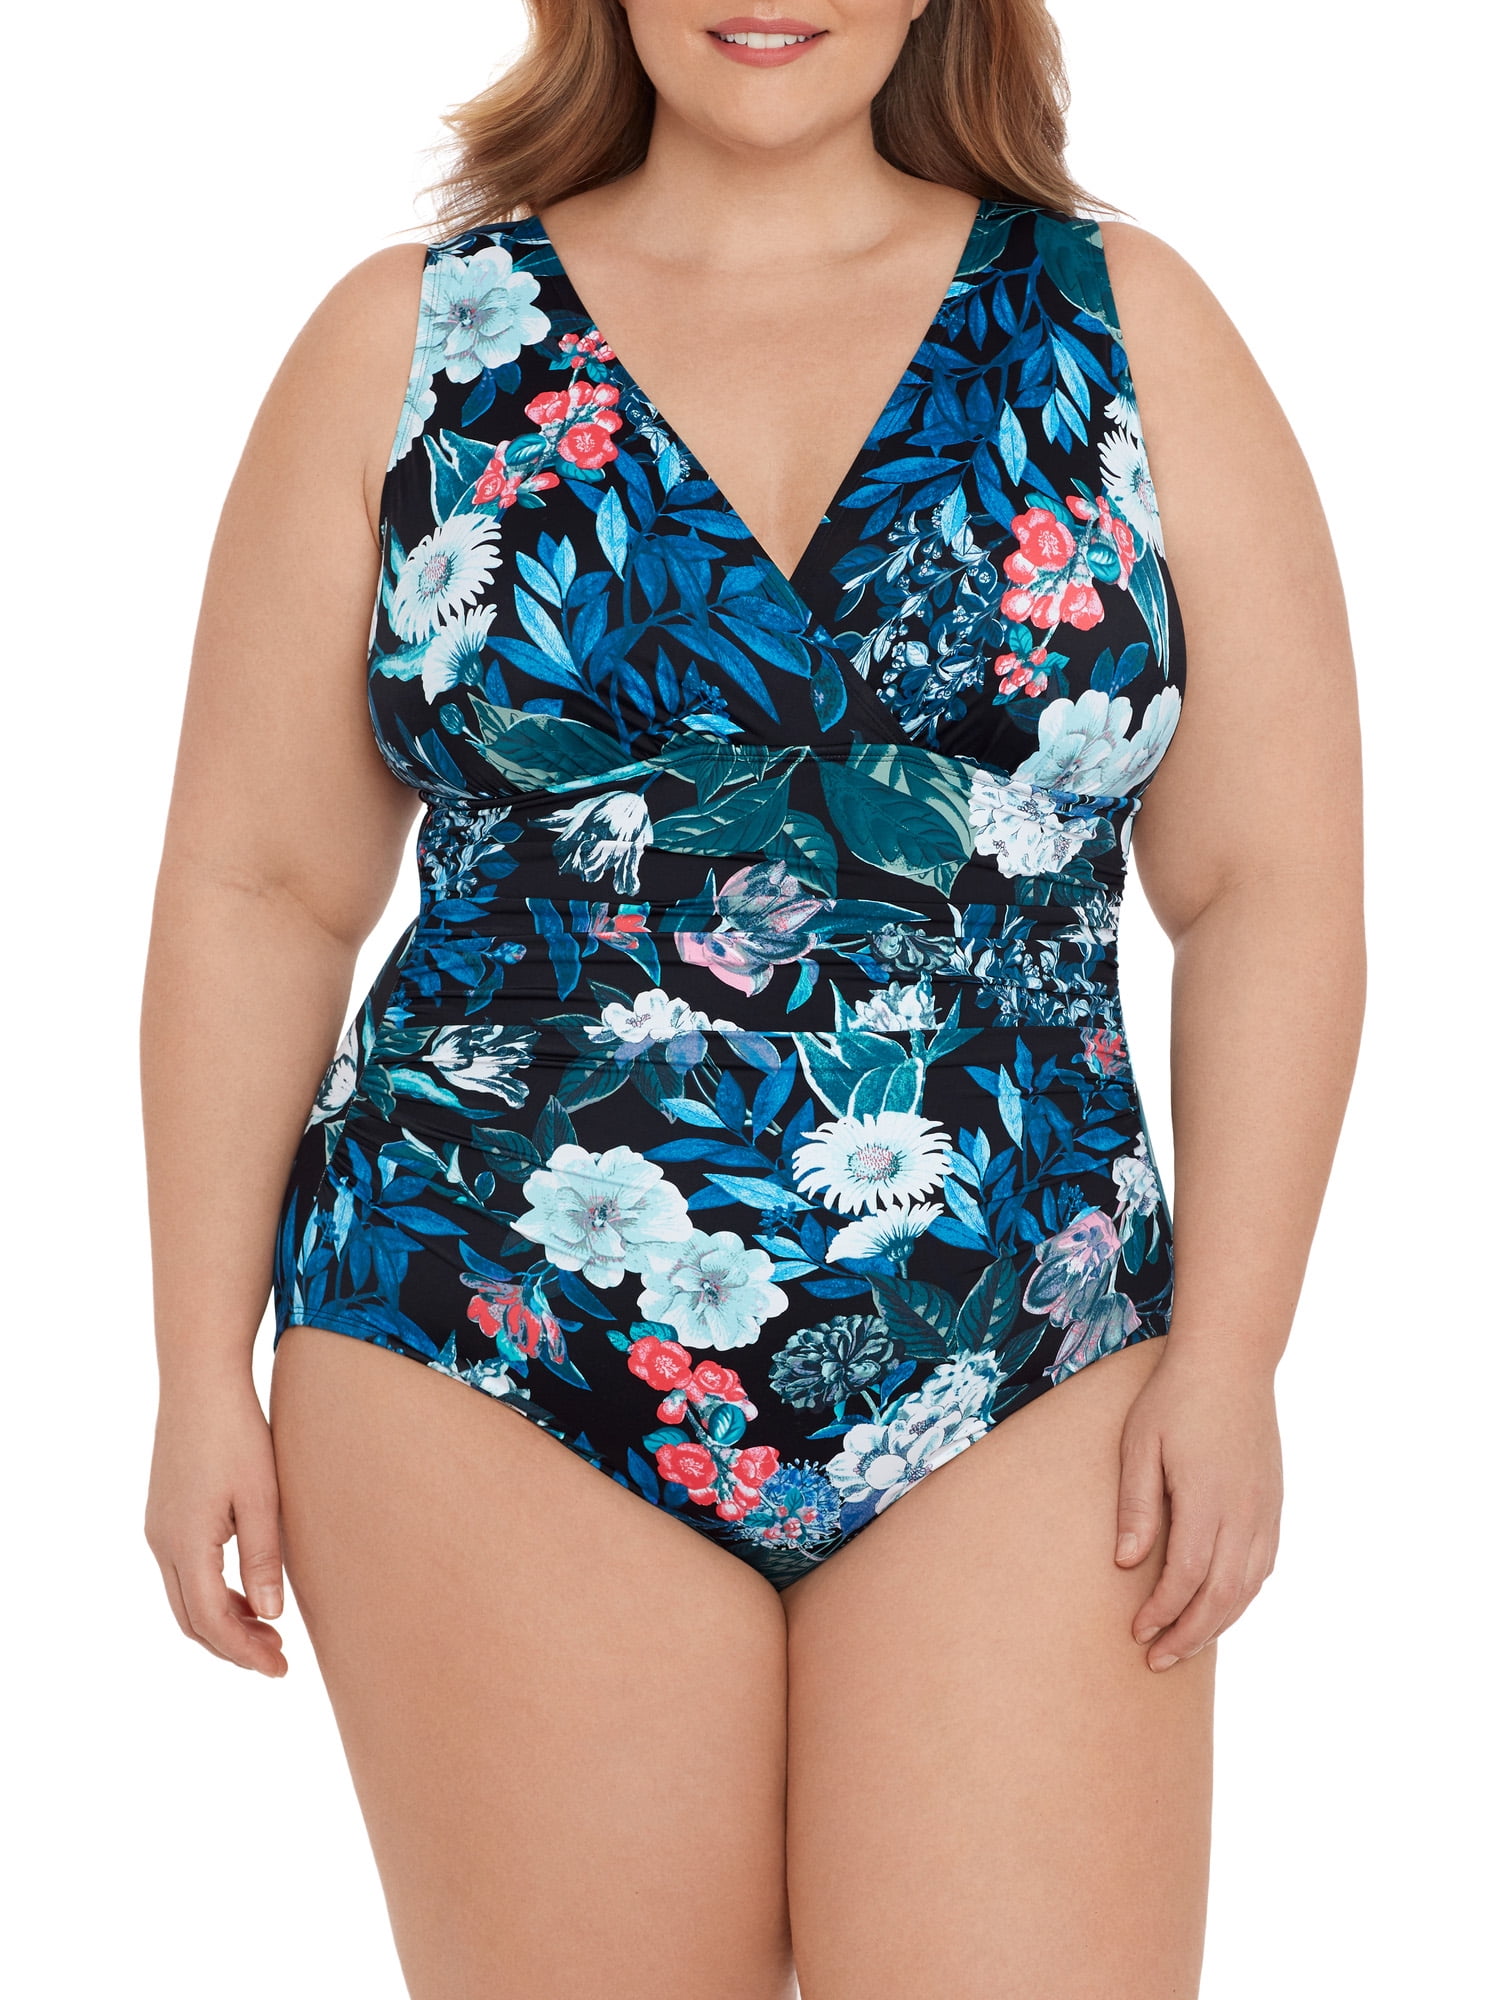 New Cleanwater Multicolor Floral Print Women's Plus One Piece Swimsuit Size 20W 